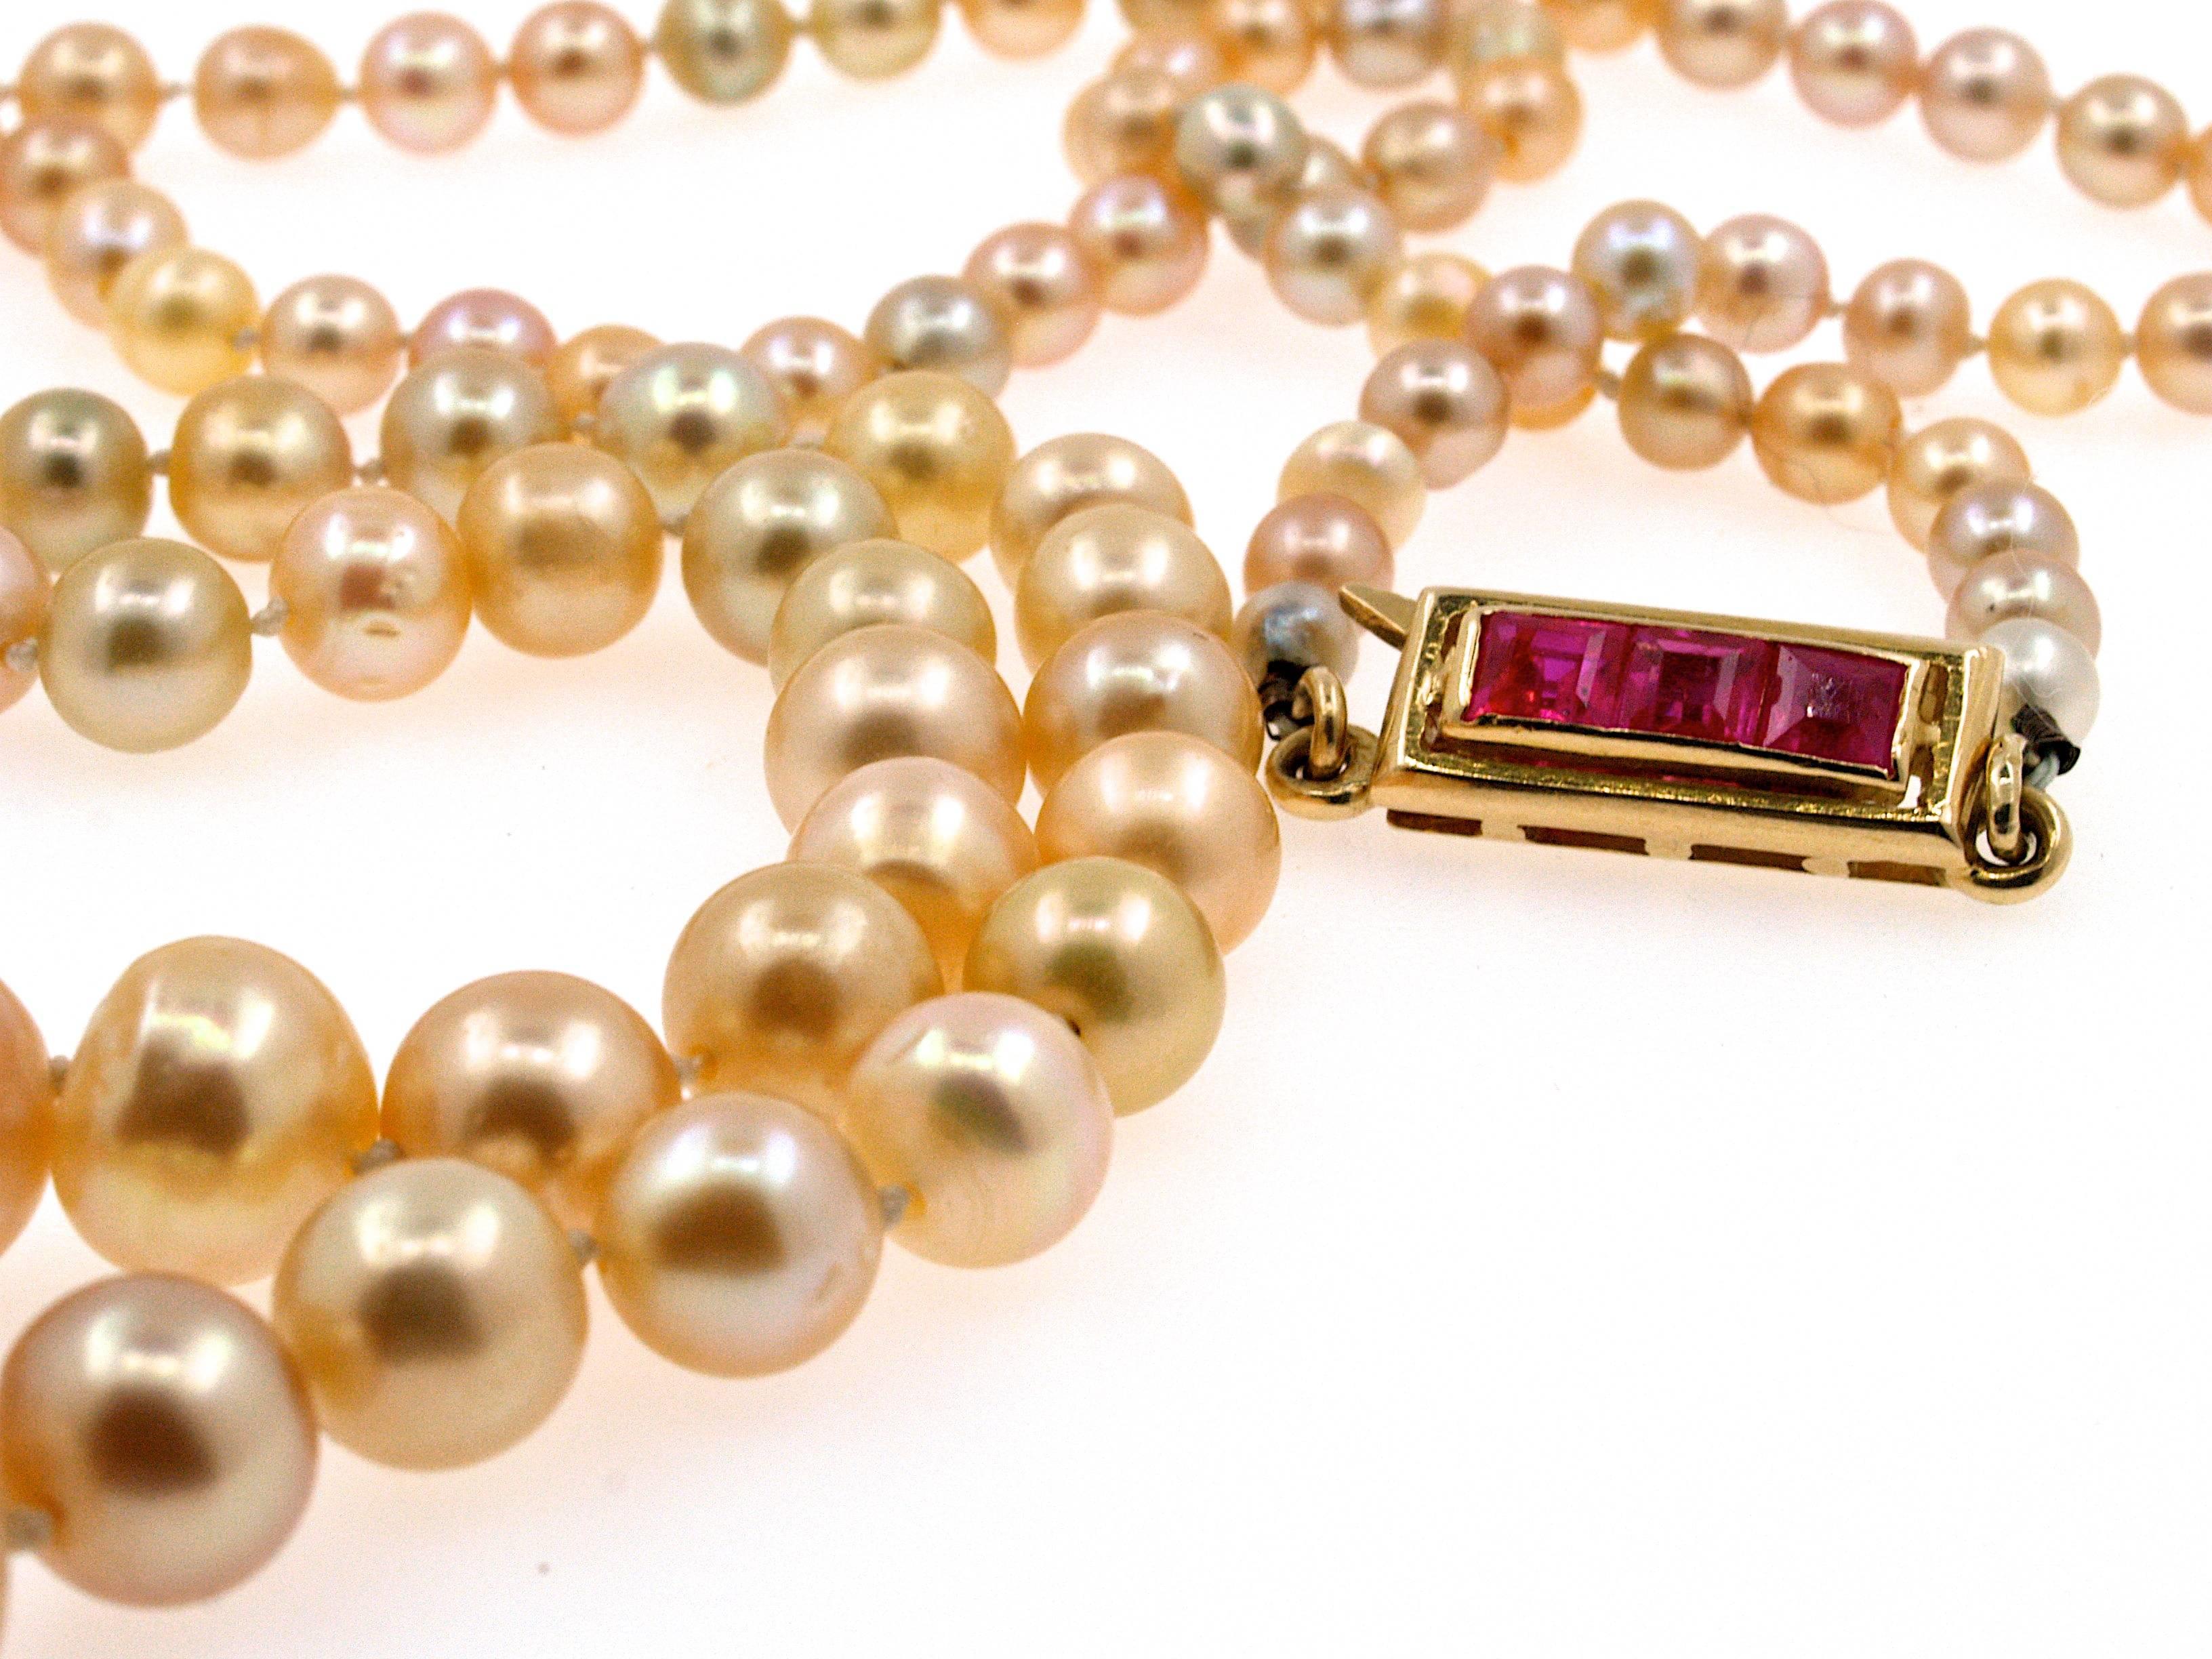 All realistic offers are welcome.

Natural Saltwater pearl and ruby necklace, Early 20th century

This beautiful necklace is composed of a graduated row of 106 natural pearls and 1 cultured pearl (the smallest one near the clasp) measuring from 3 mm